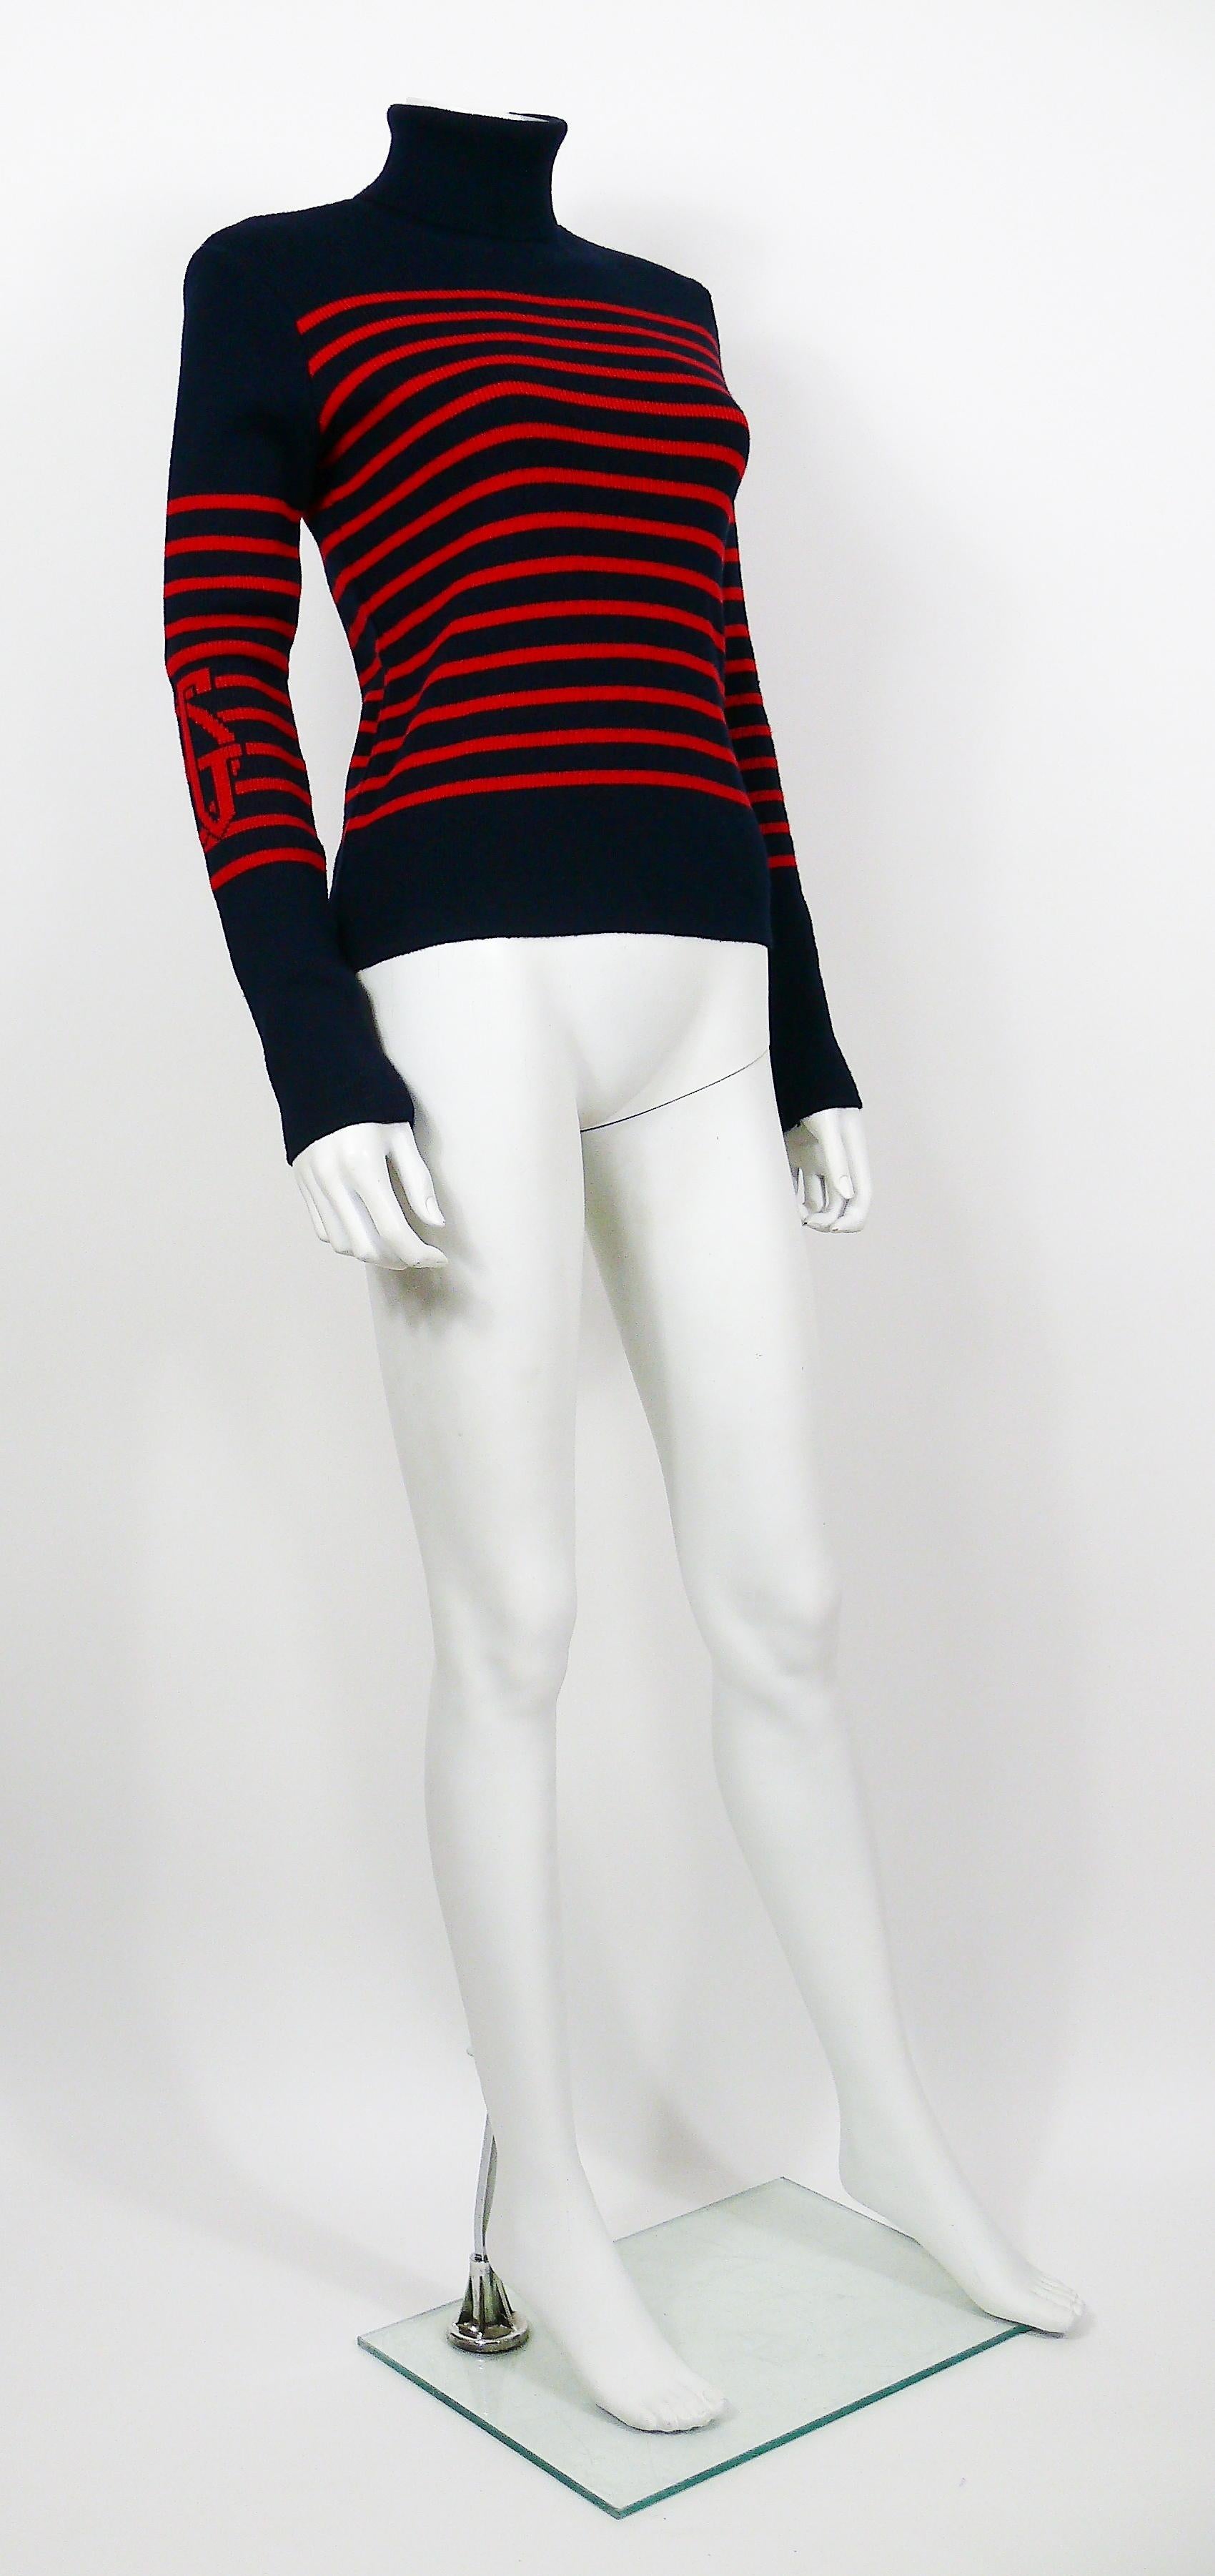 JEAN PAUL GAULTIER vintage iconic wool blend navy blue/red matelot sweater featuring large JPG monogram on each sleeve.

Turtle neck.
Long sleeves.

Label reads JPG JEAN'S DONNA.
Made in Italy.

Composition label reads : 50% Acrylic / 50%